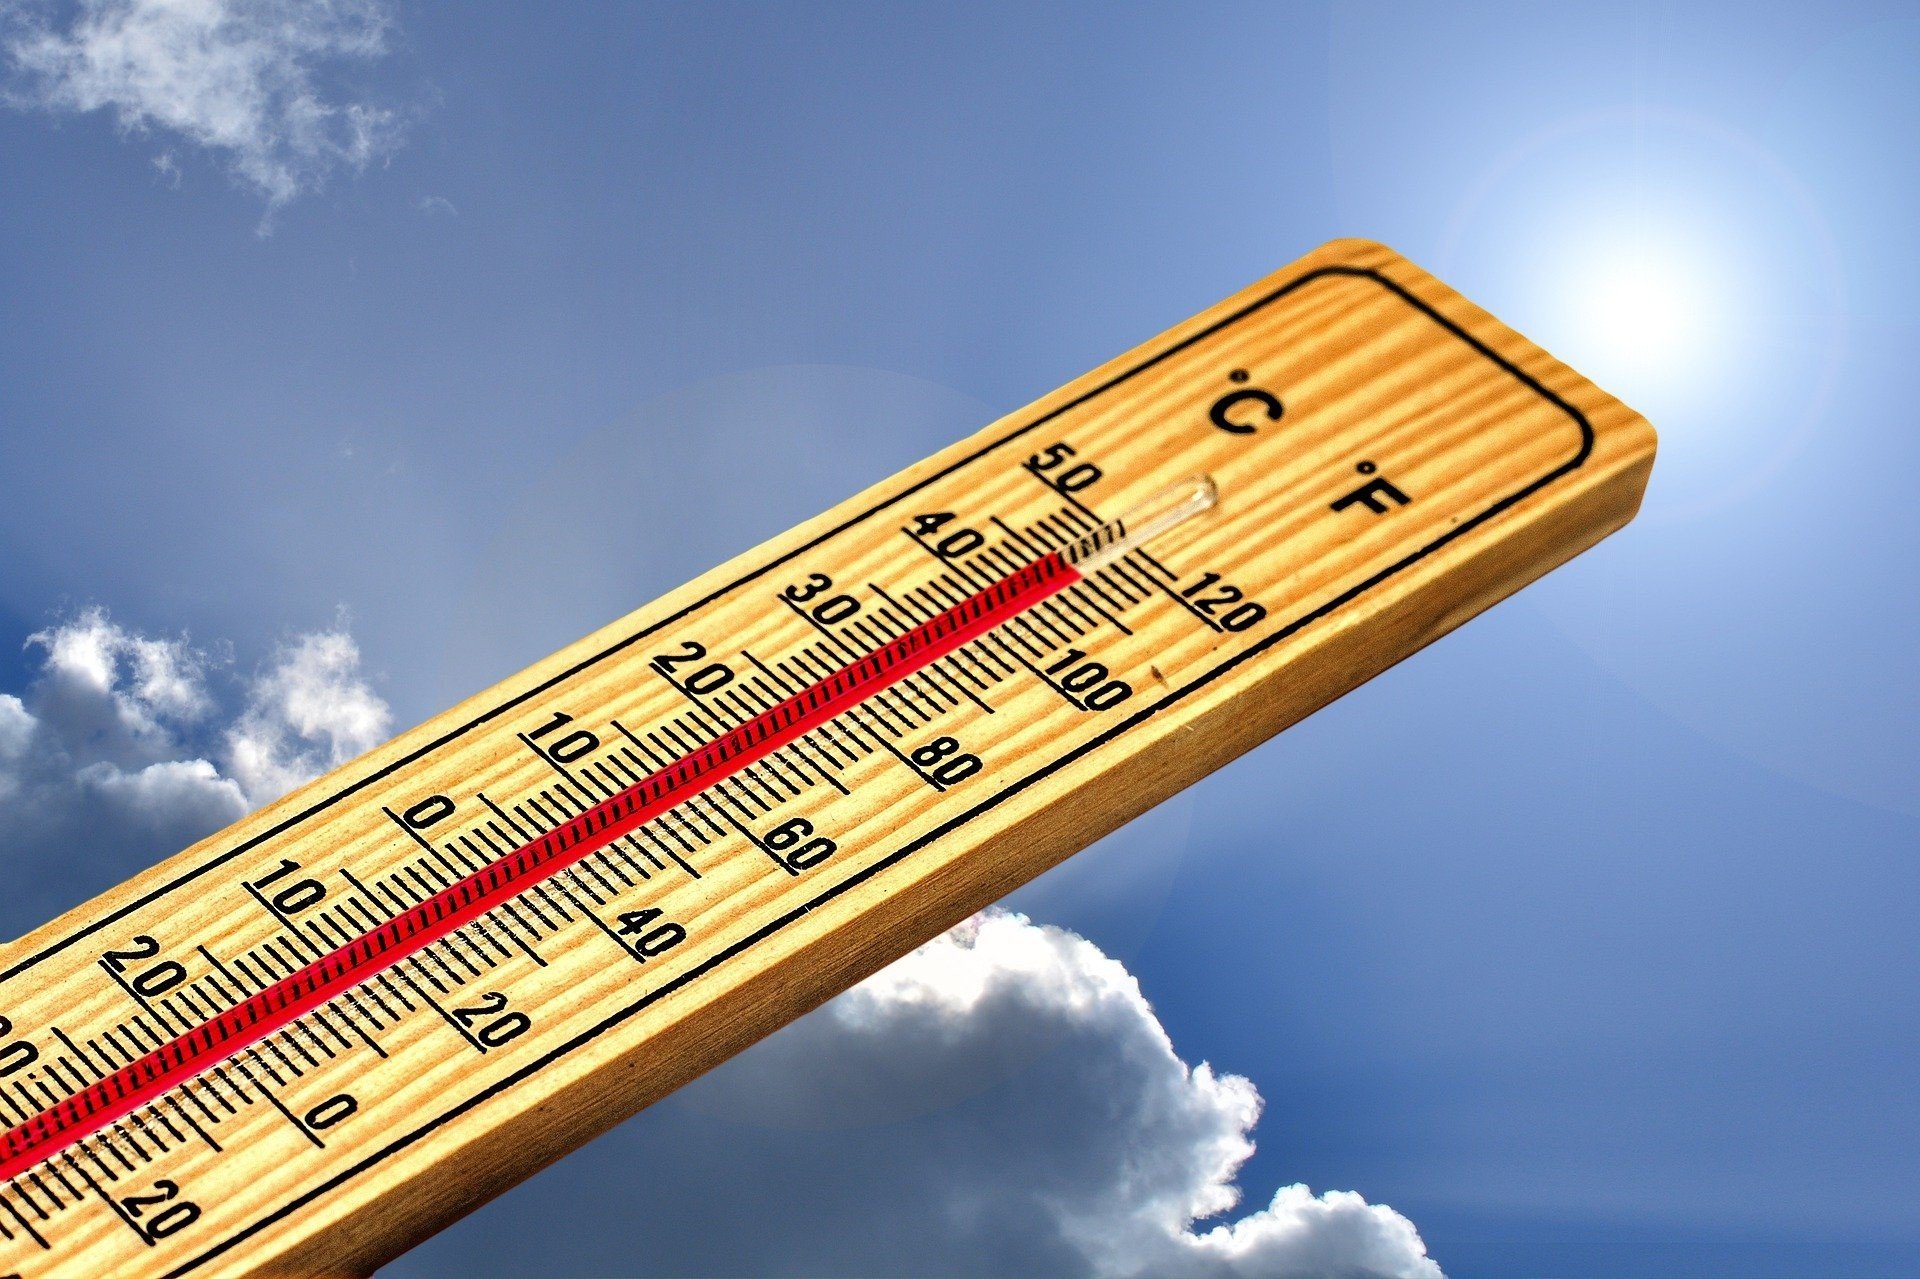 Long-term weather for summer 2023. Meteorologists are sounding the alarm: heat waves are ahead